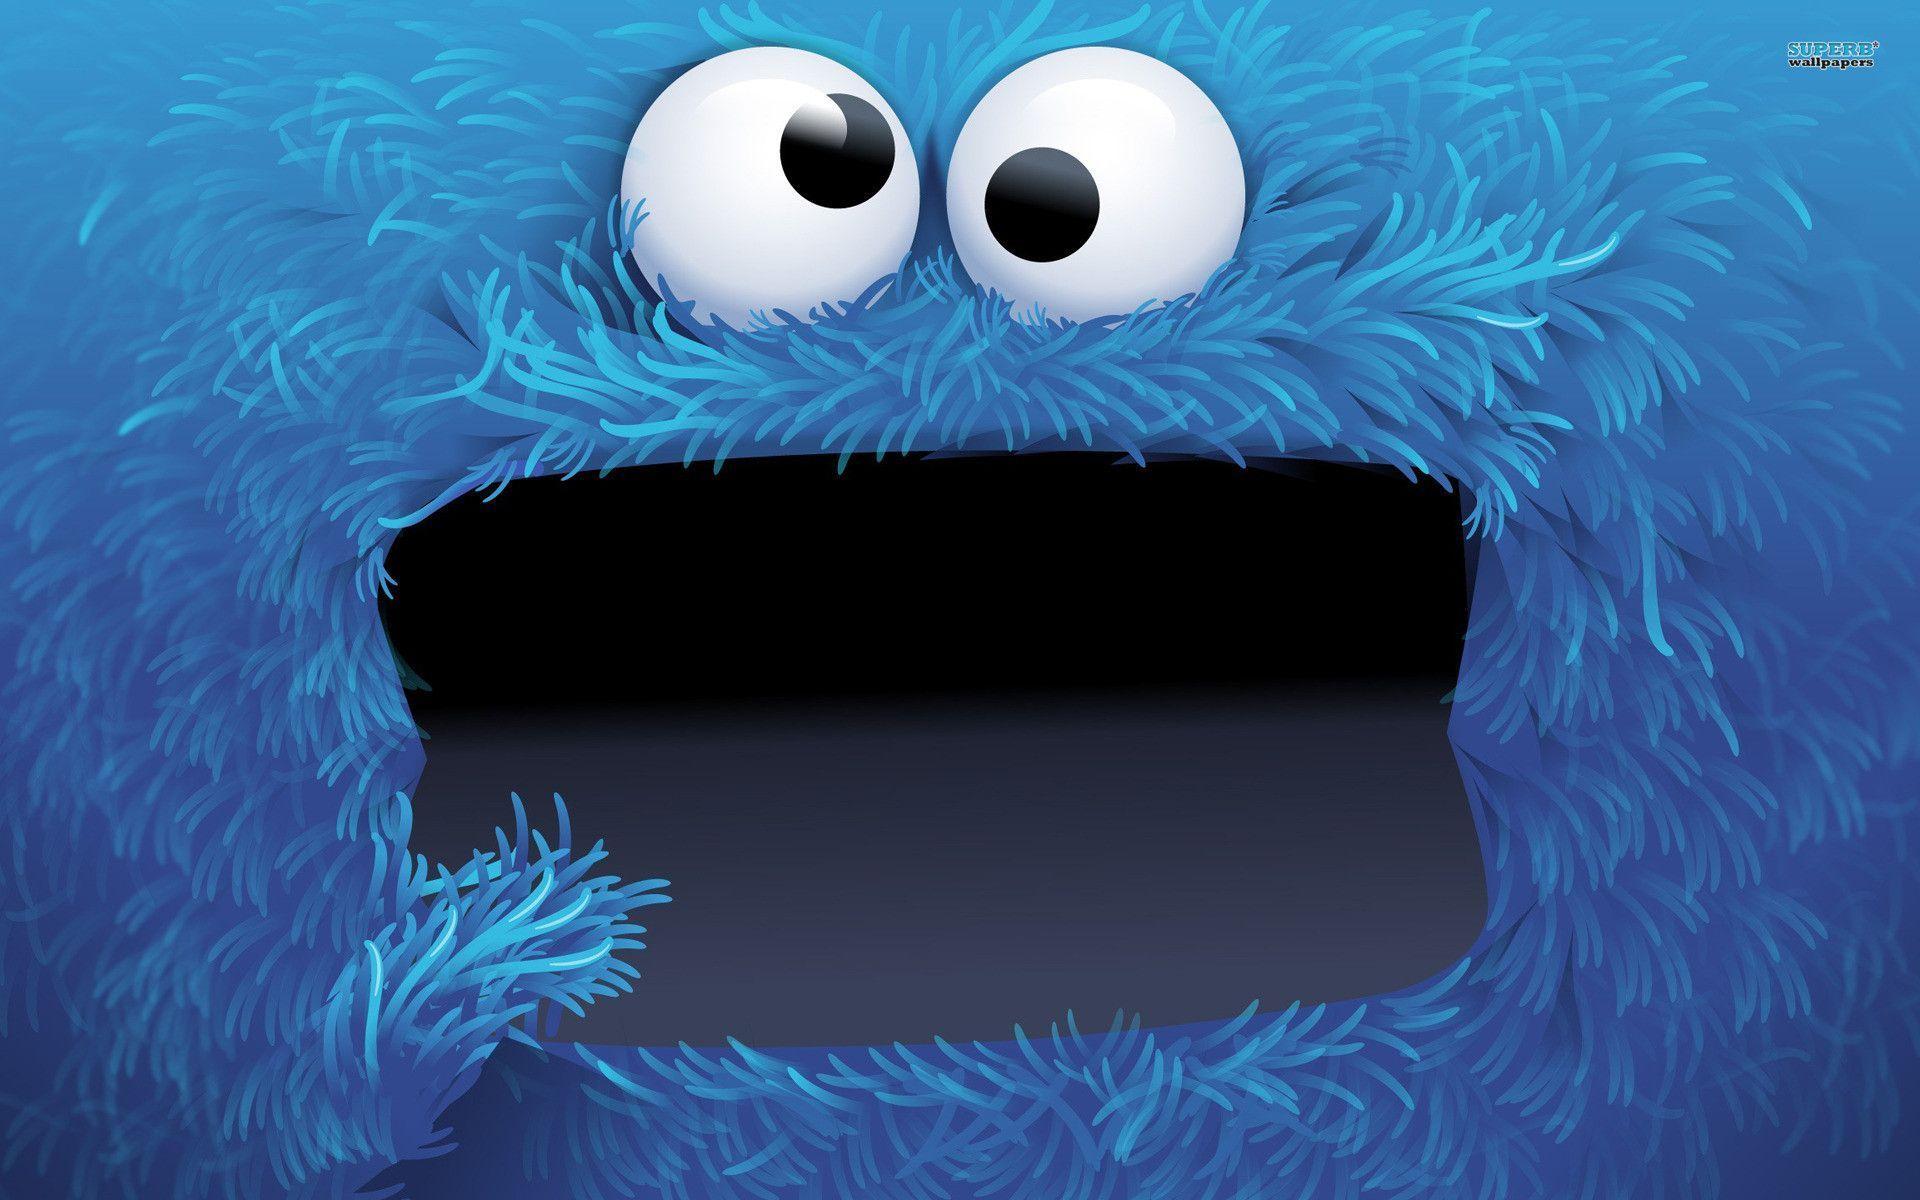 Cookie Monster Wallpaper, Quality Cool Cookie Monster Photo